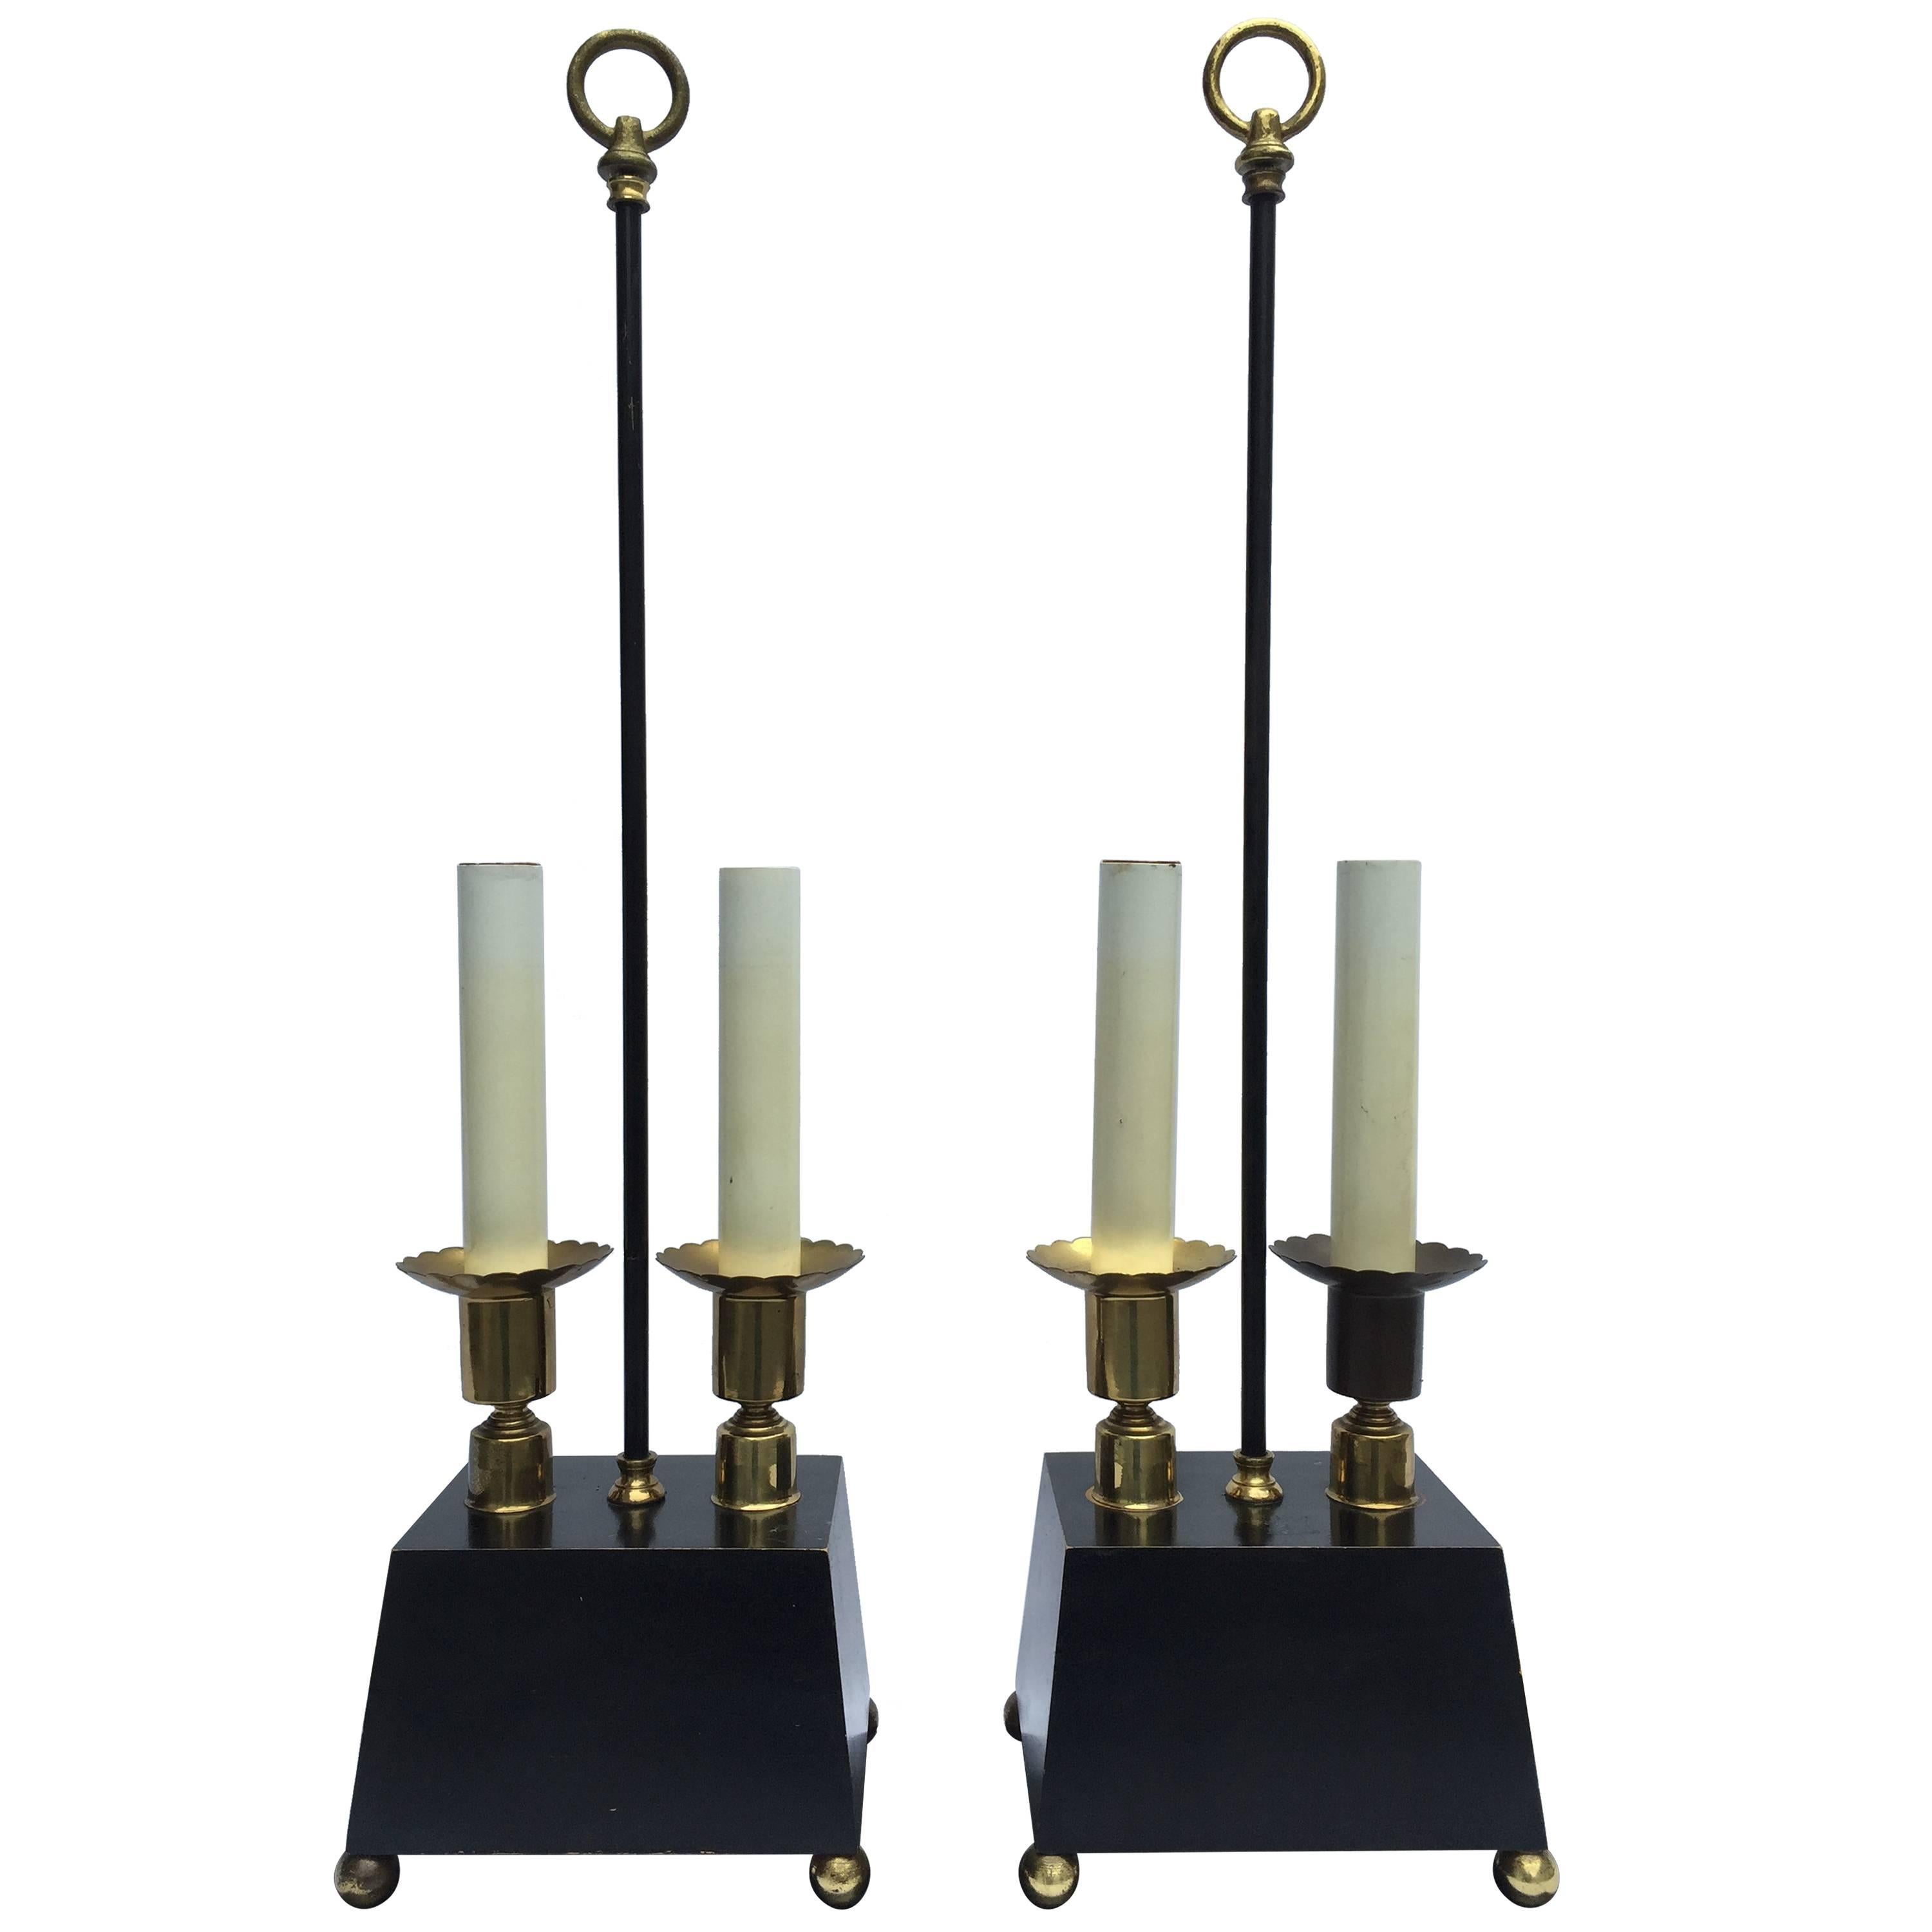 Pair of Parzinger-esque Wood and Brass Table Lamps with Trapezoid Bases